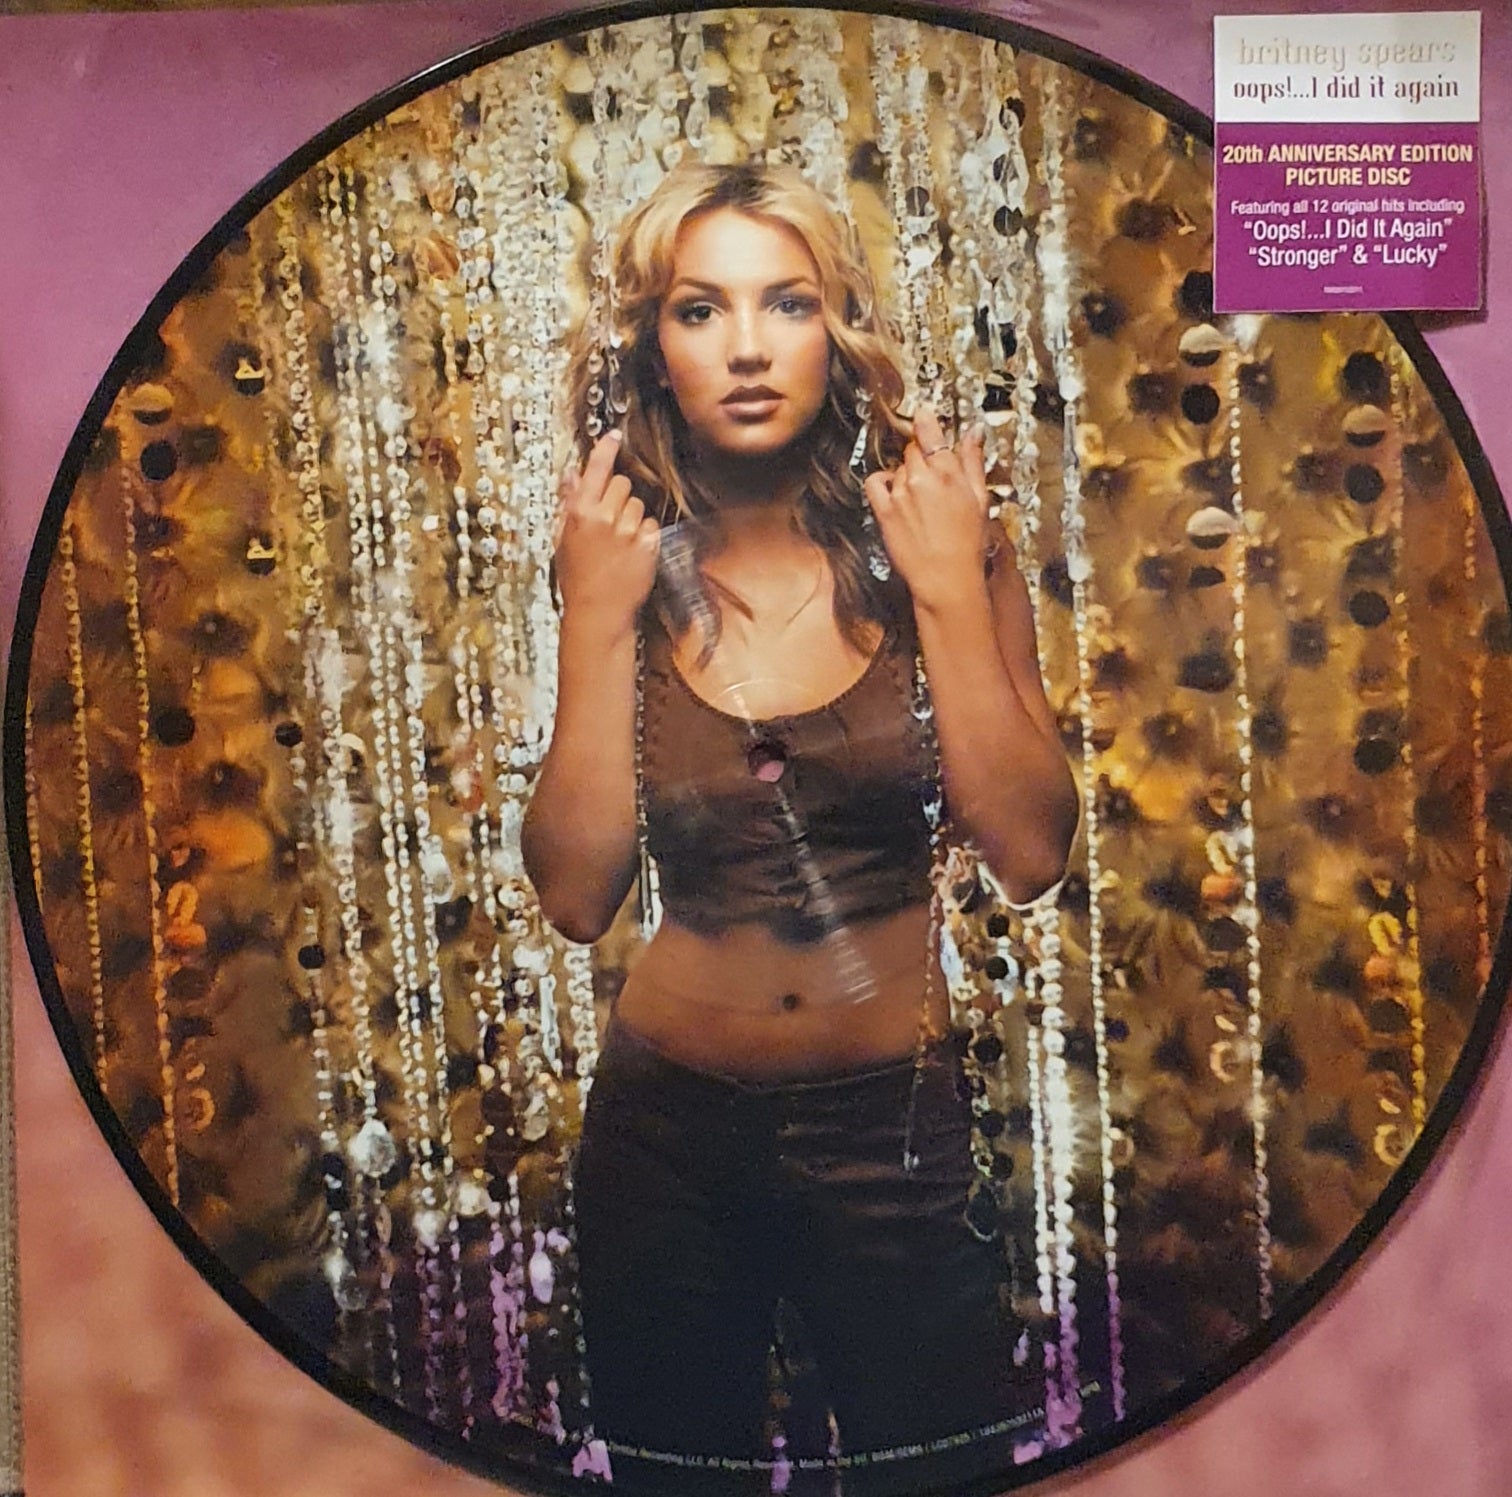 BRITNEY SPEARS - Opps!...I Did It Again - Limited Picture Disc